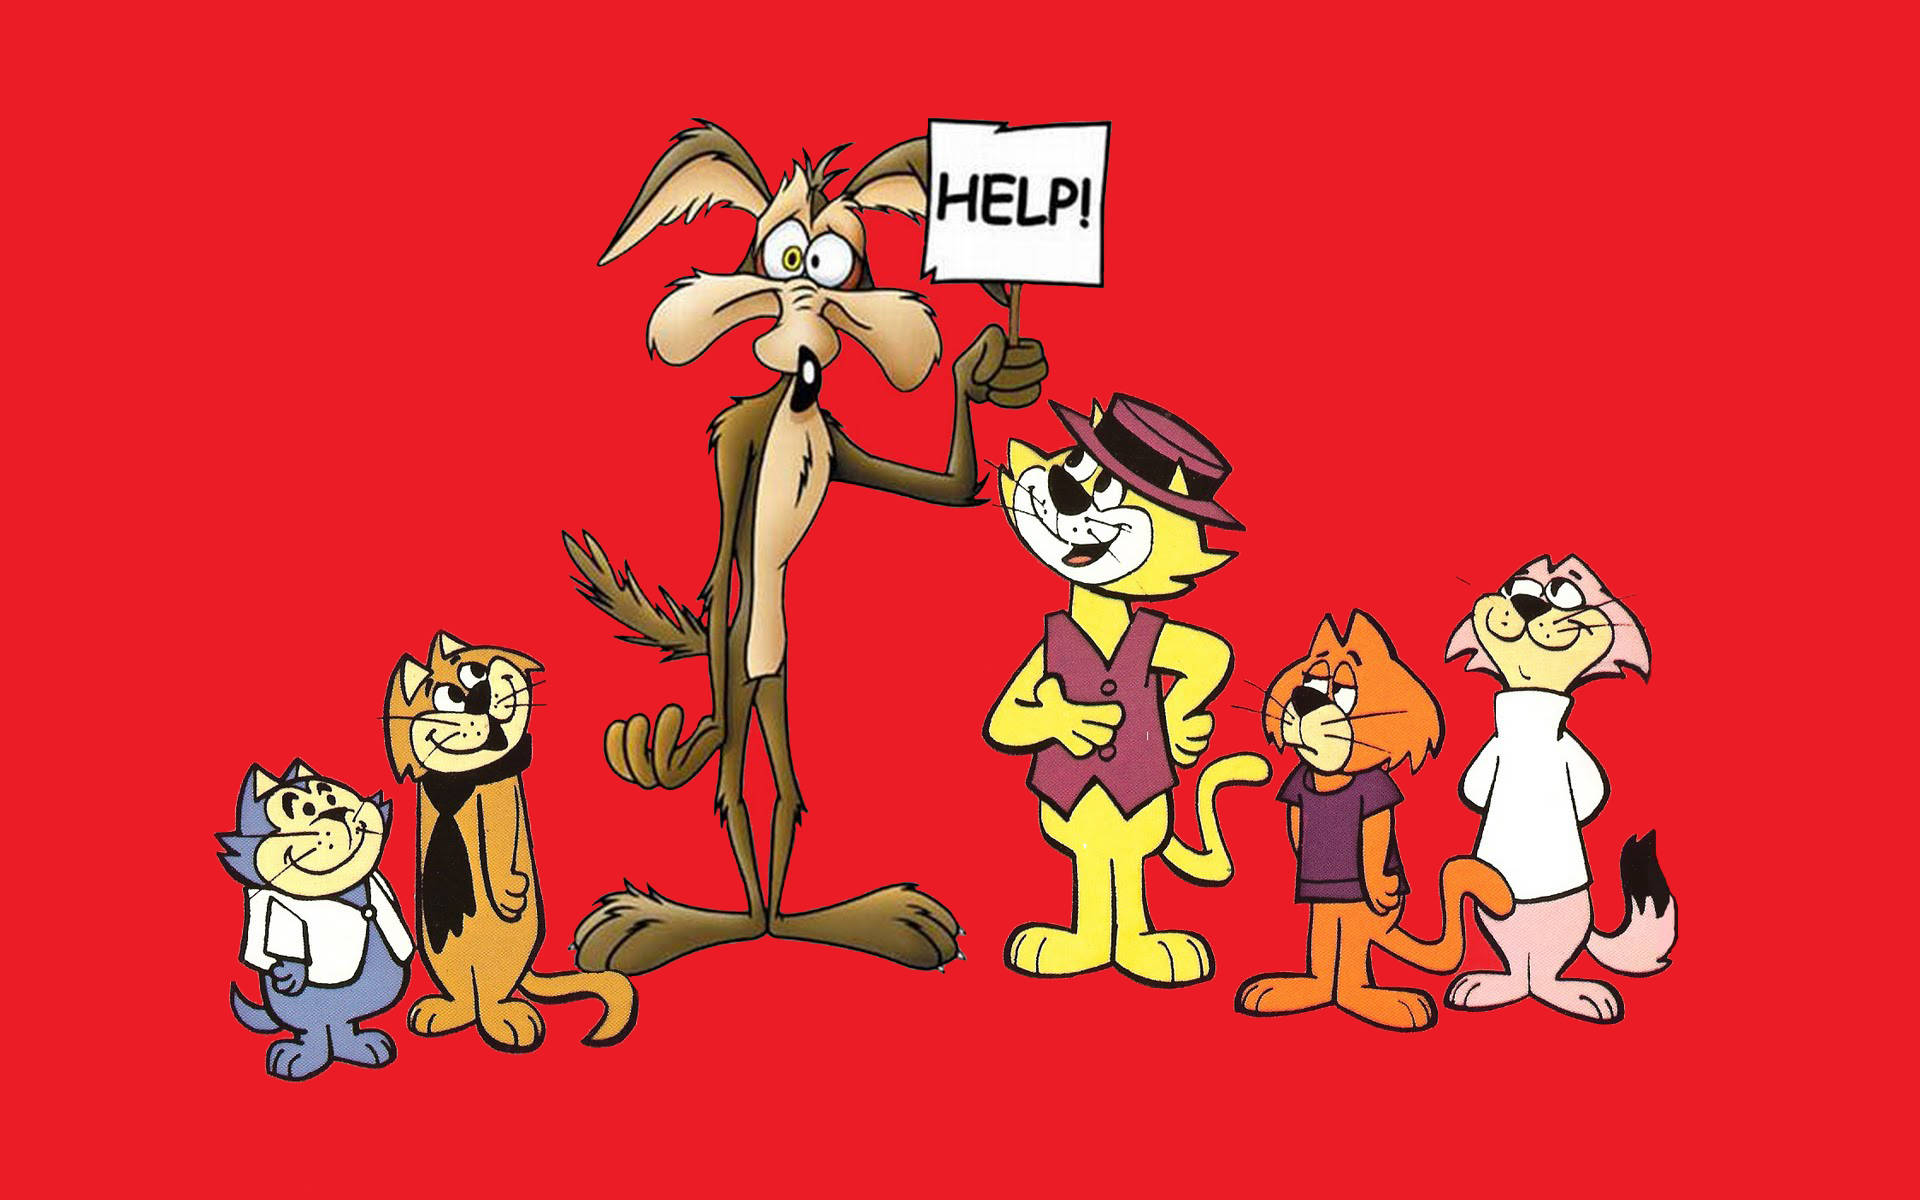 Wile E Coyote With Help Signage Wallpaper